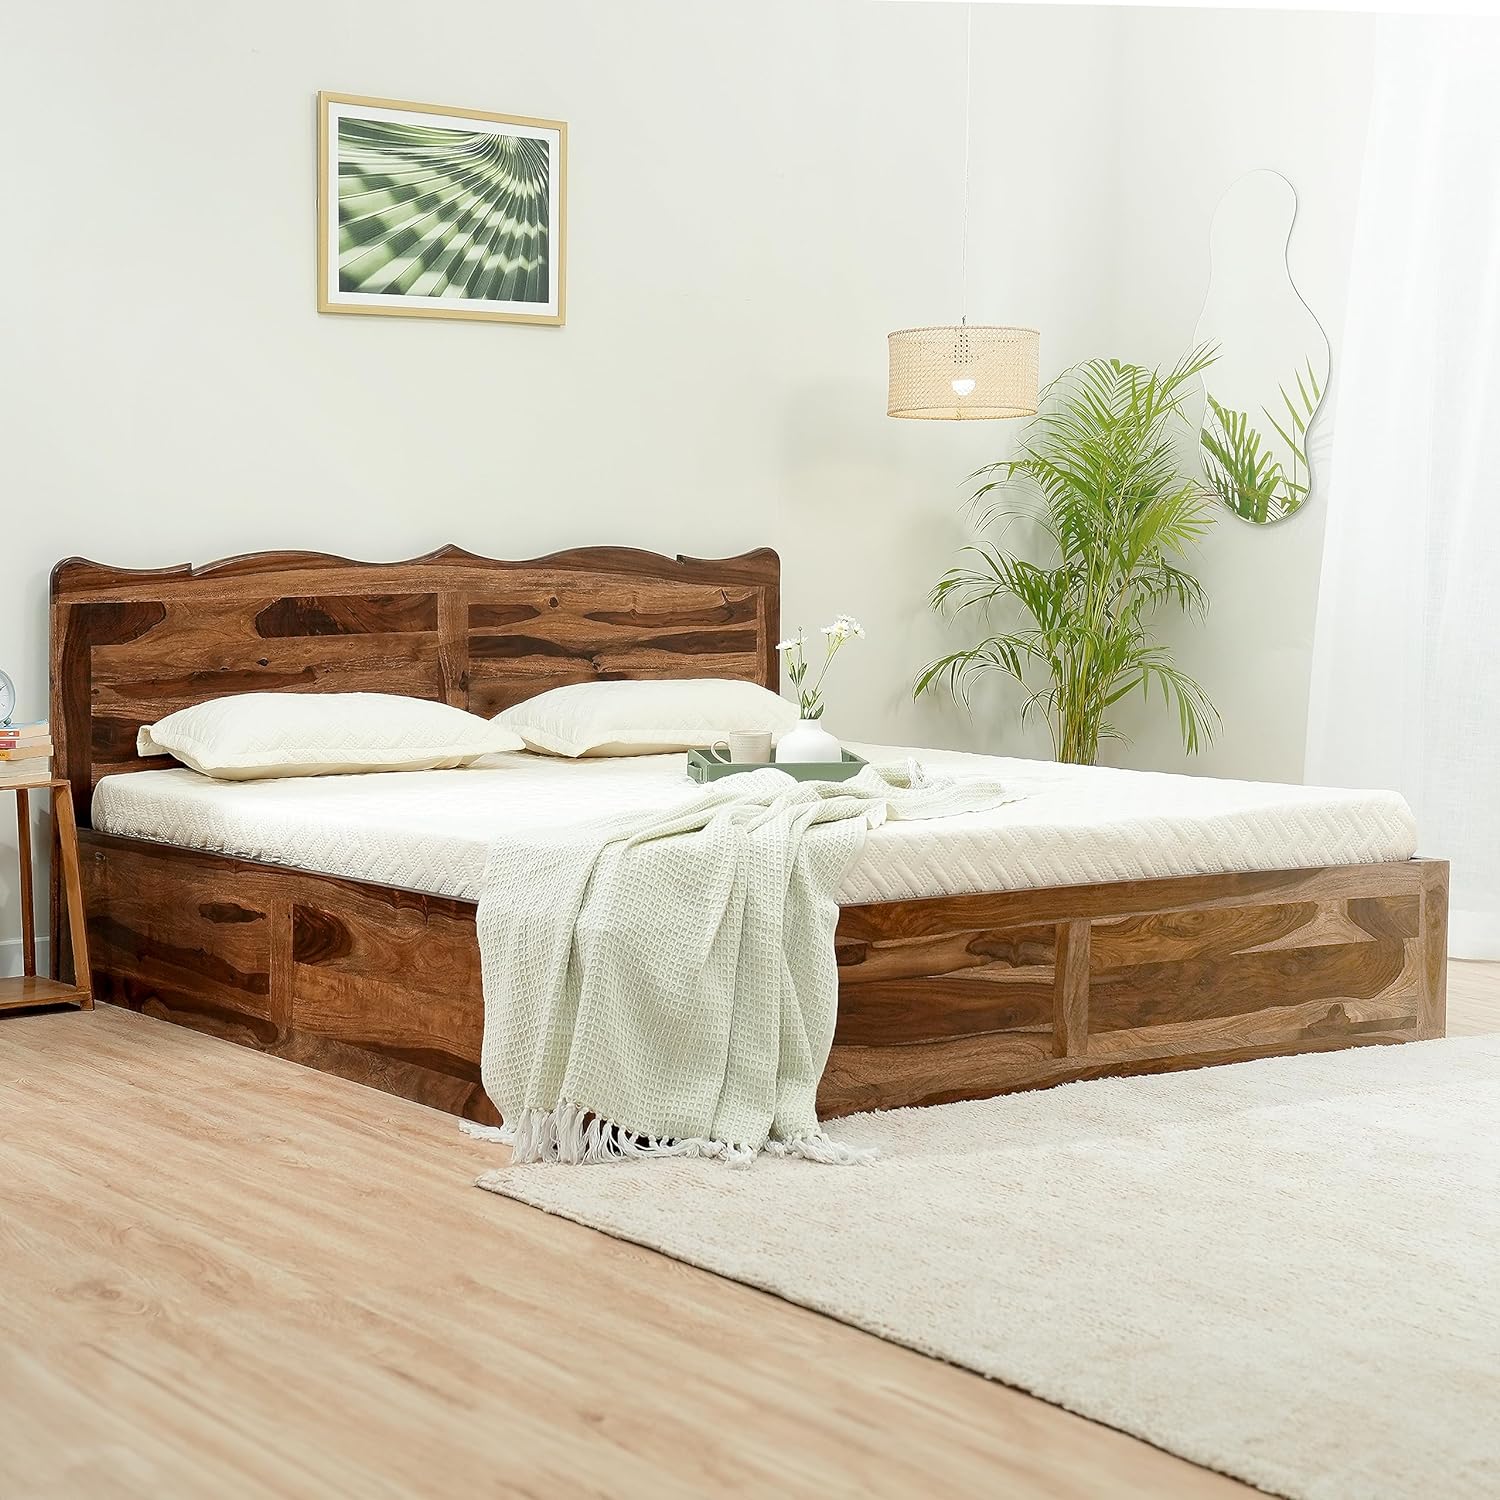 Solid Sheesham Wood King Size Bed Without Storage Without Headboard